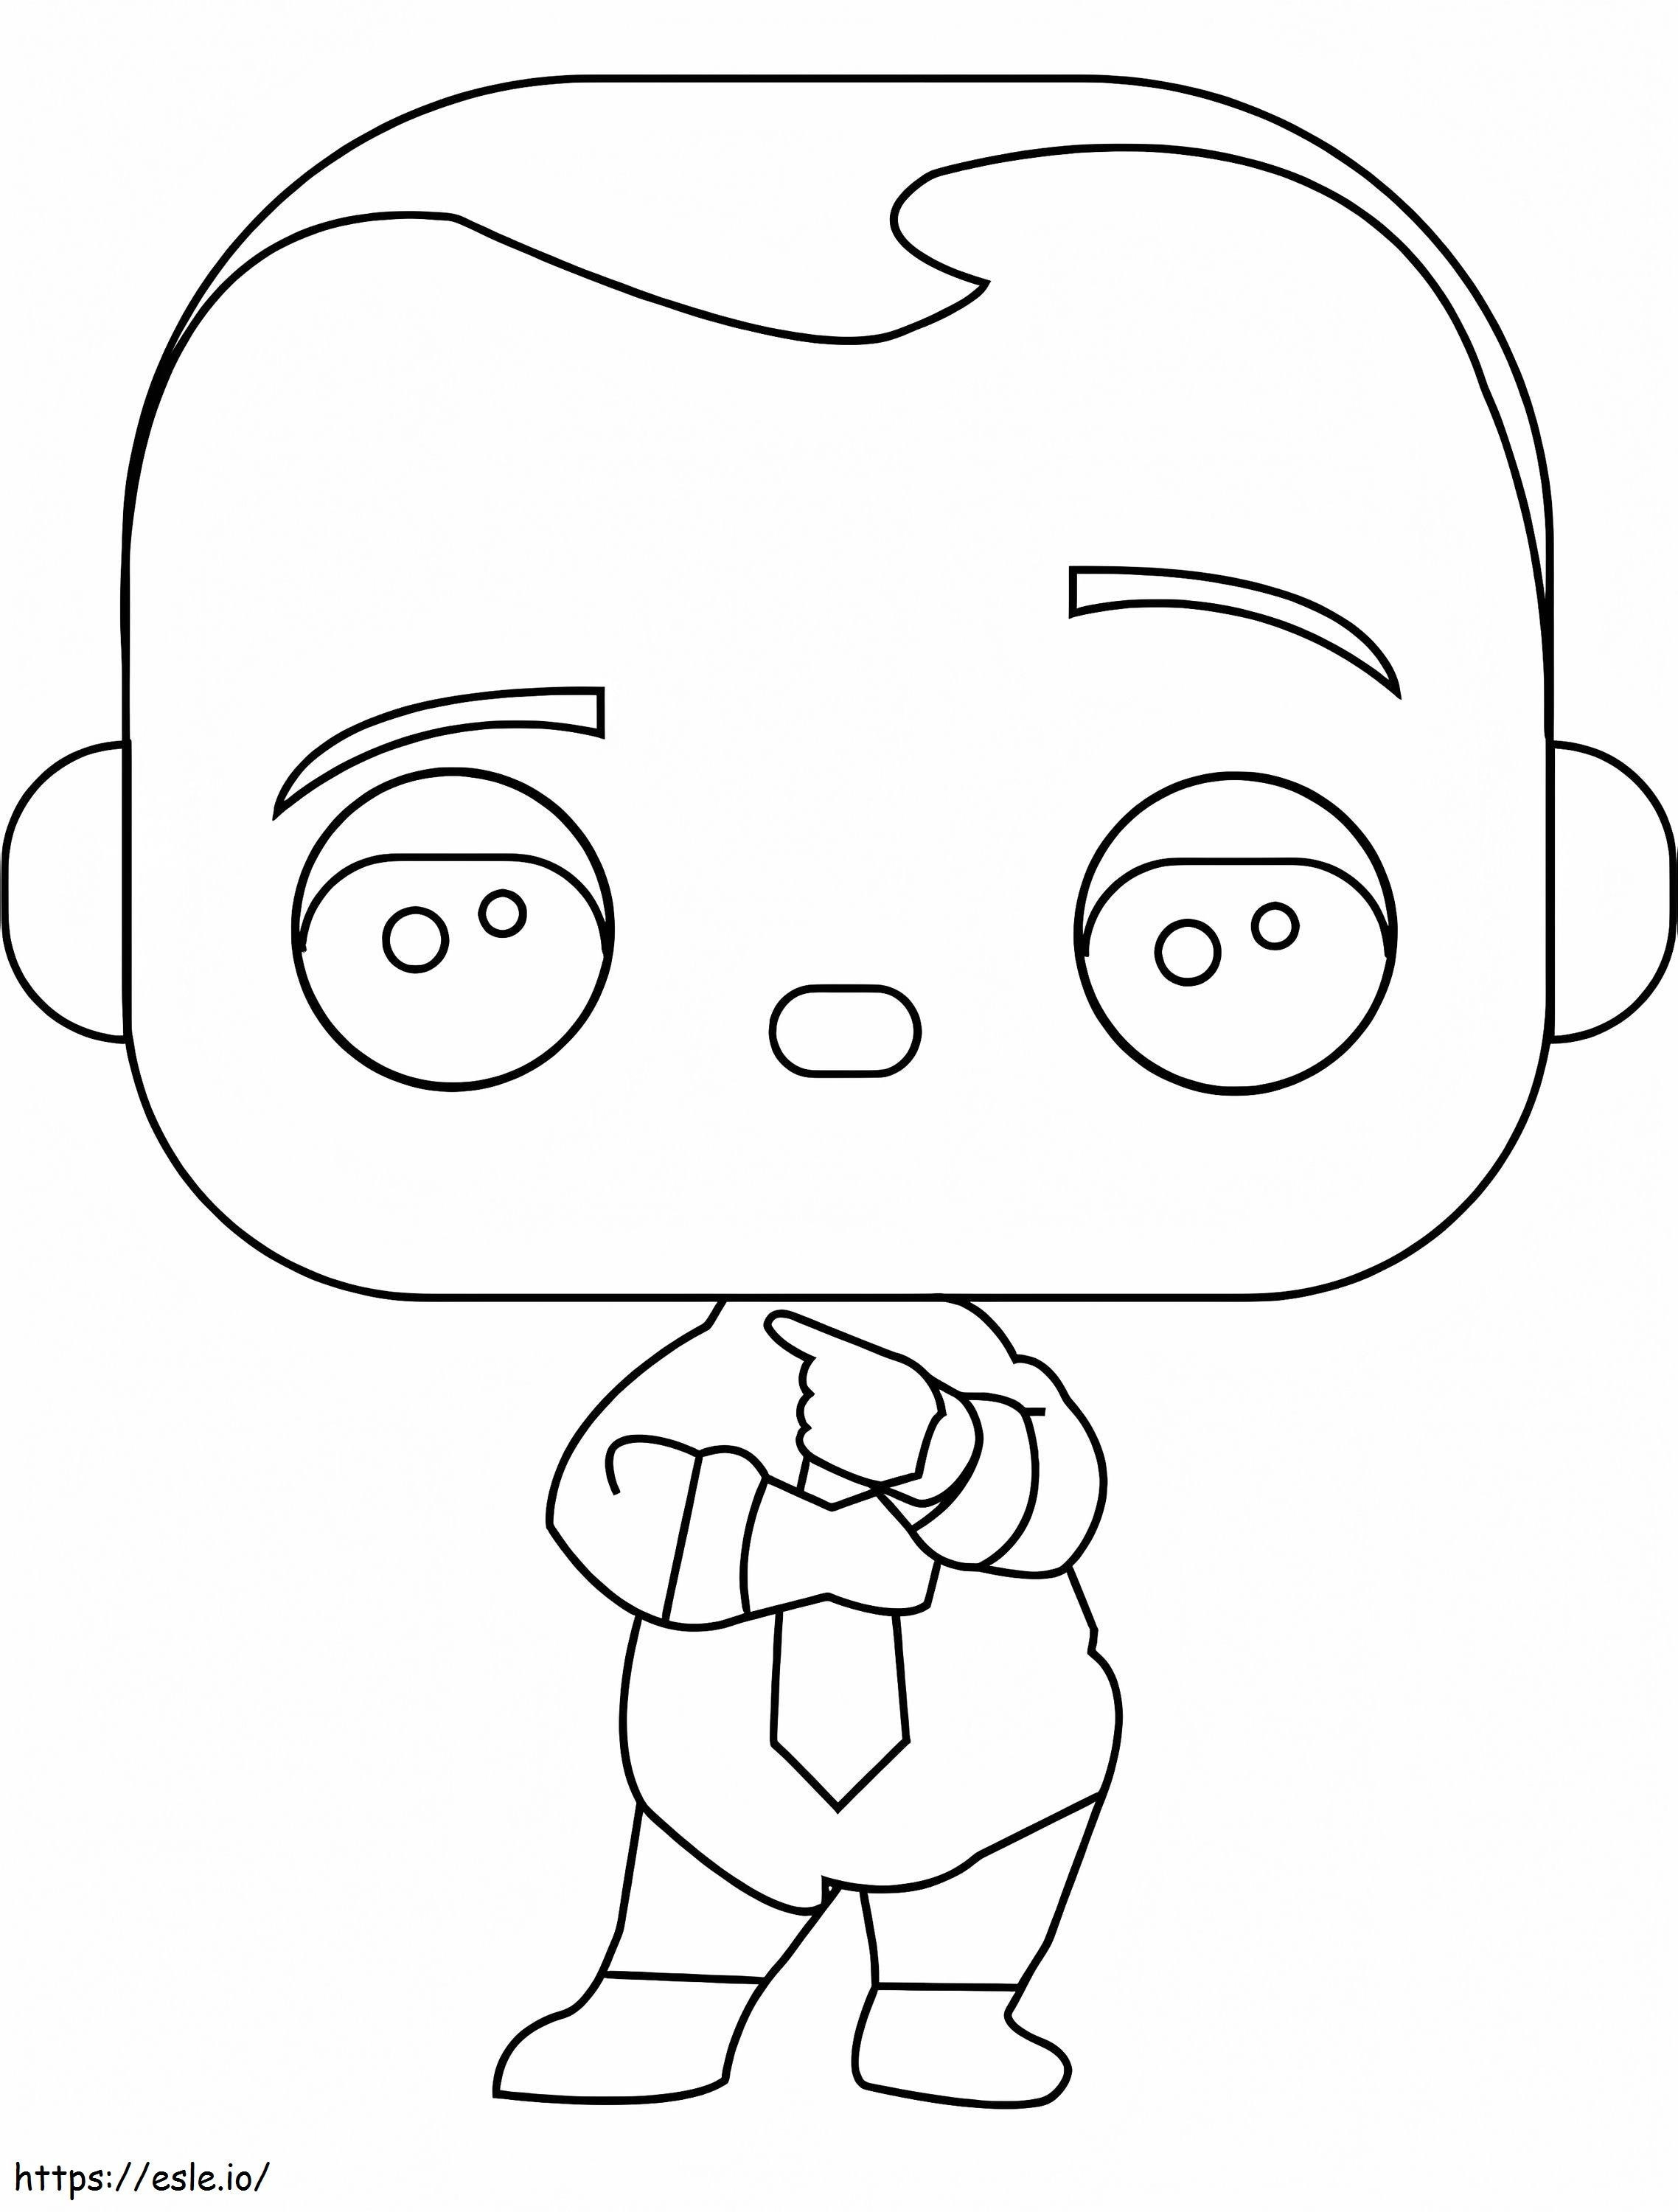 Boss Baby Funko coloring page